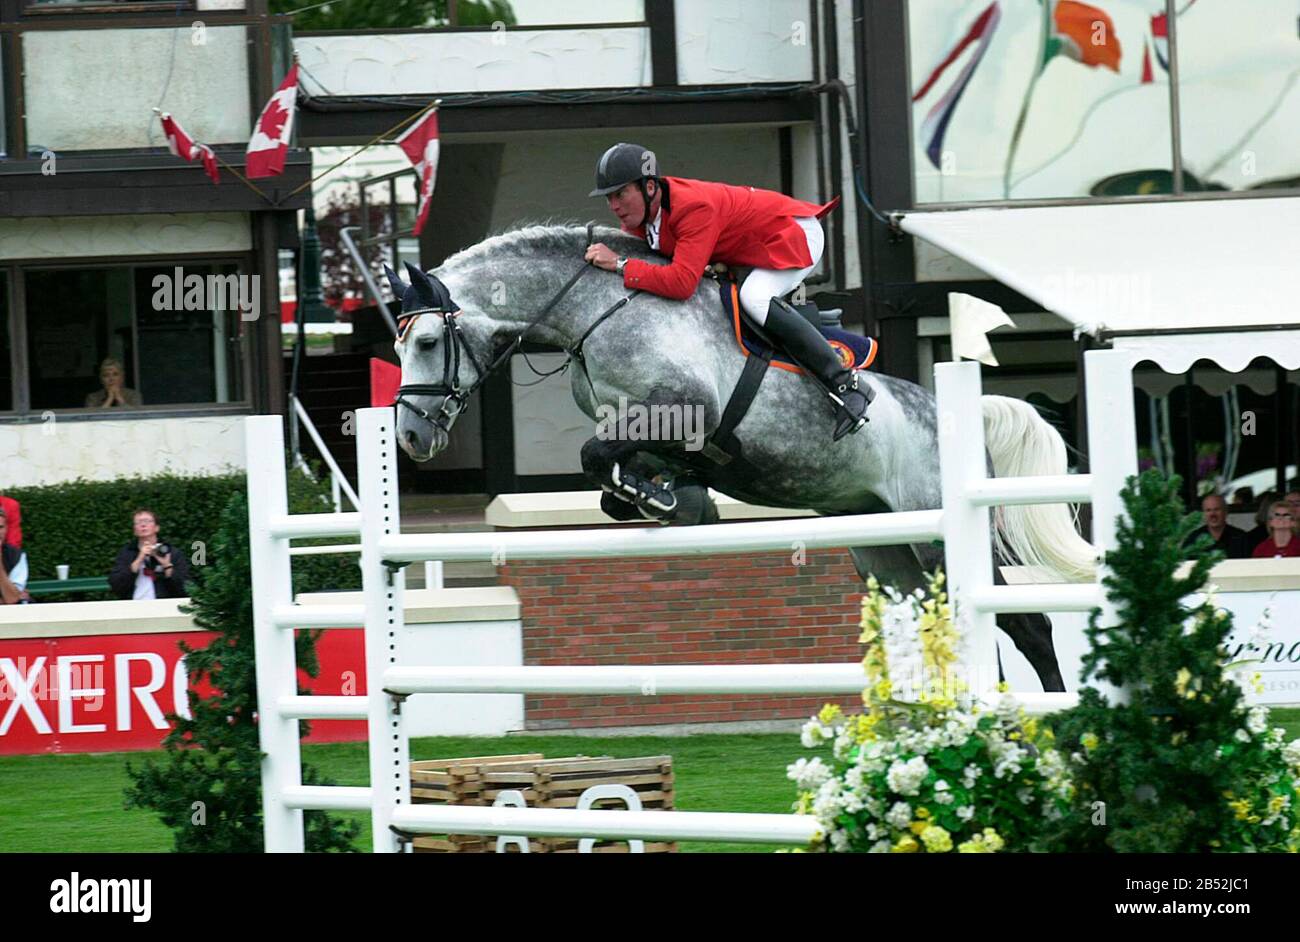 CSIO Masters, Spruce Meadows, September 2001, Cana Cup, Thomas Voss (GER) riding Clinton Stock Photo